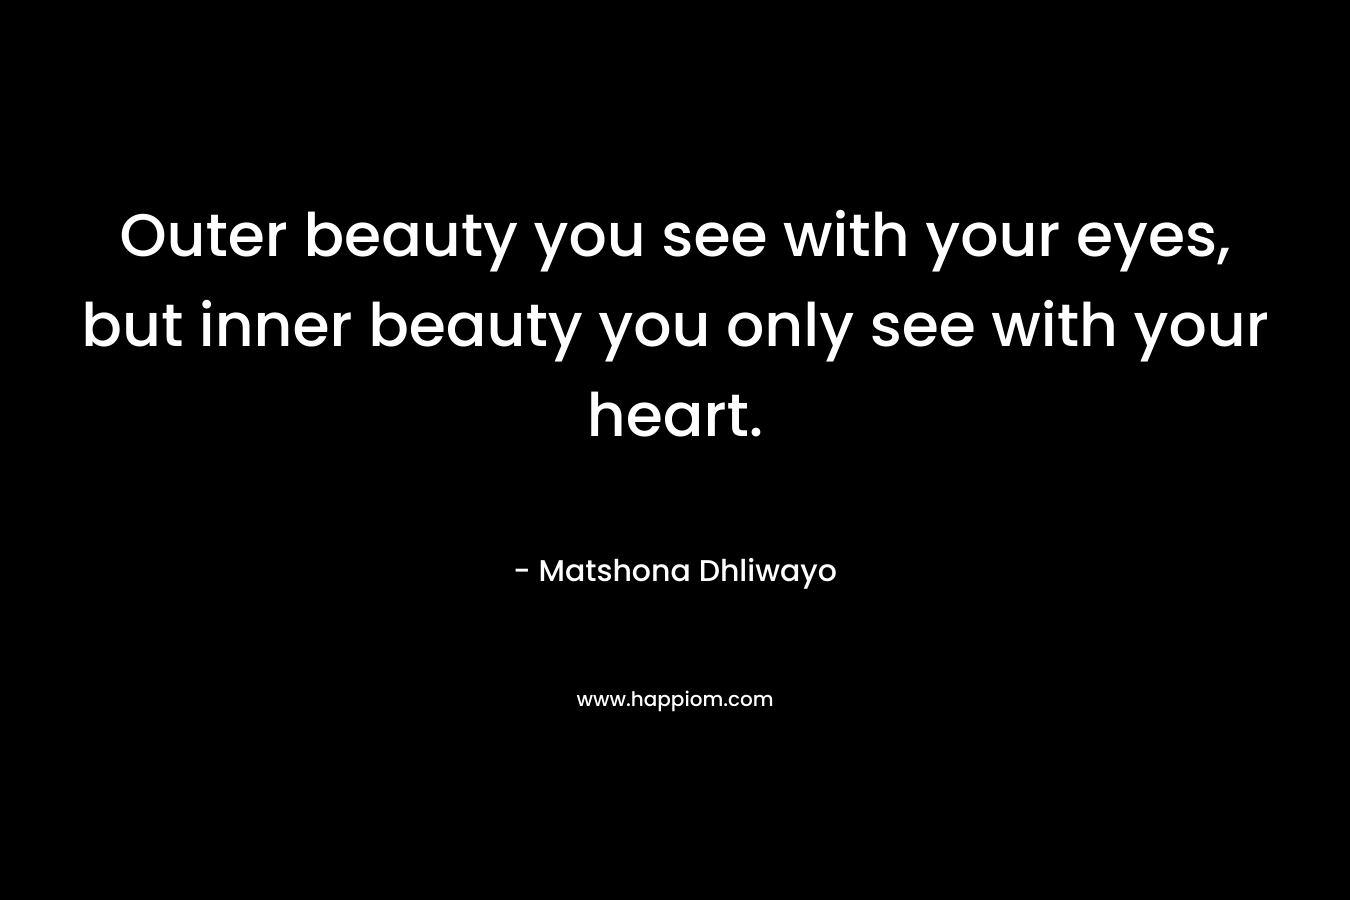 Outer beauty you see with your eyes, but inner beauty you only see with your heart.